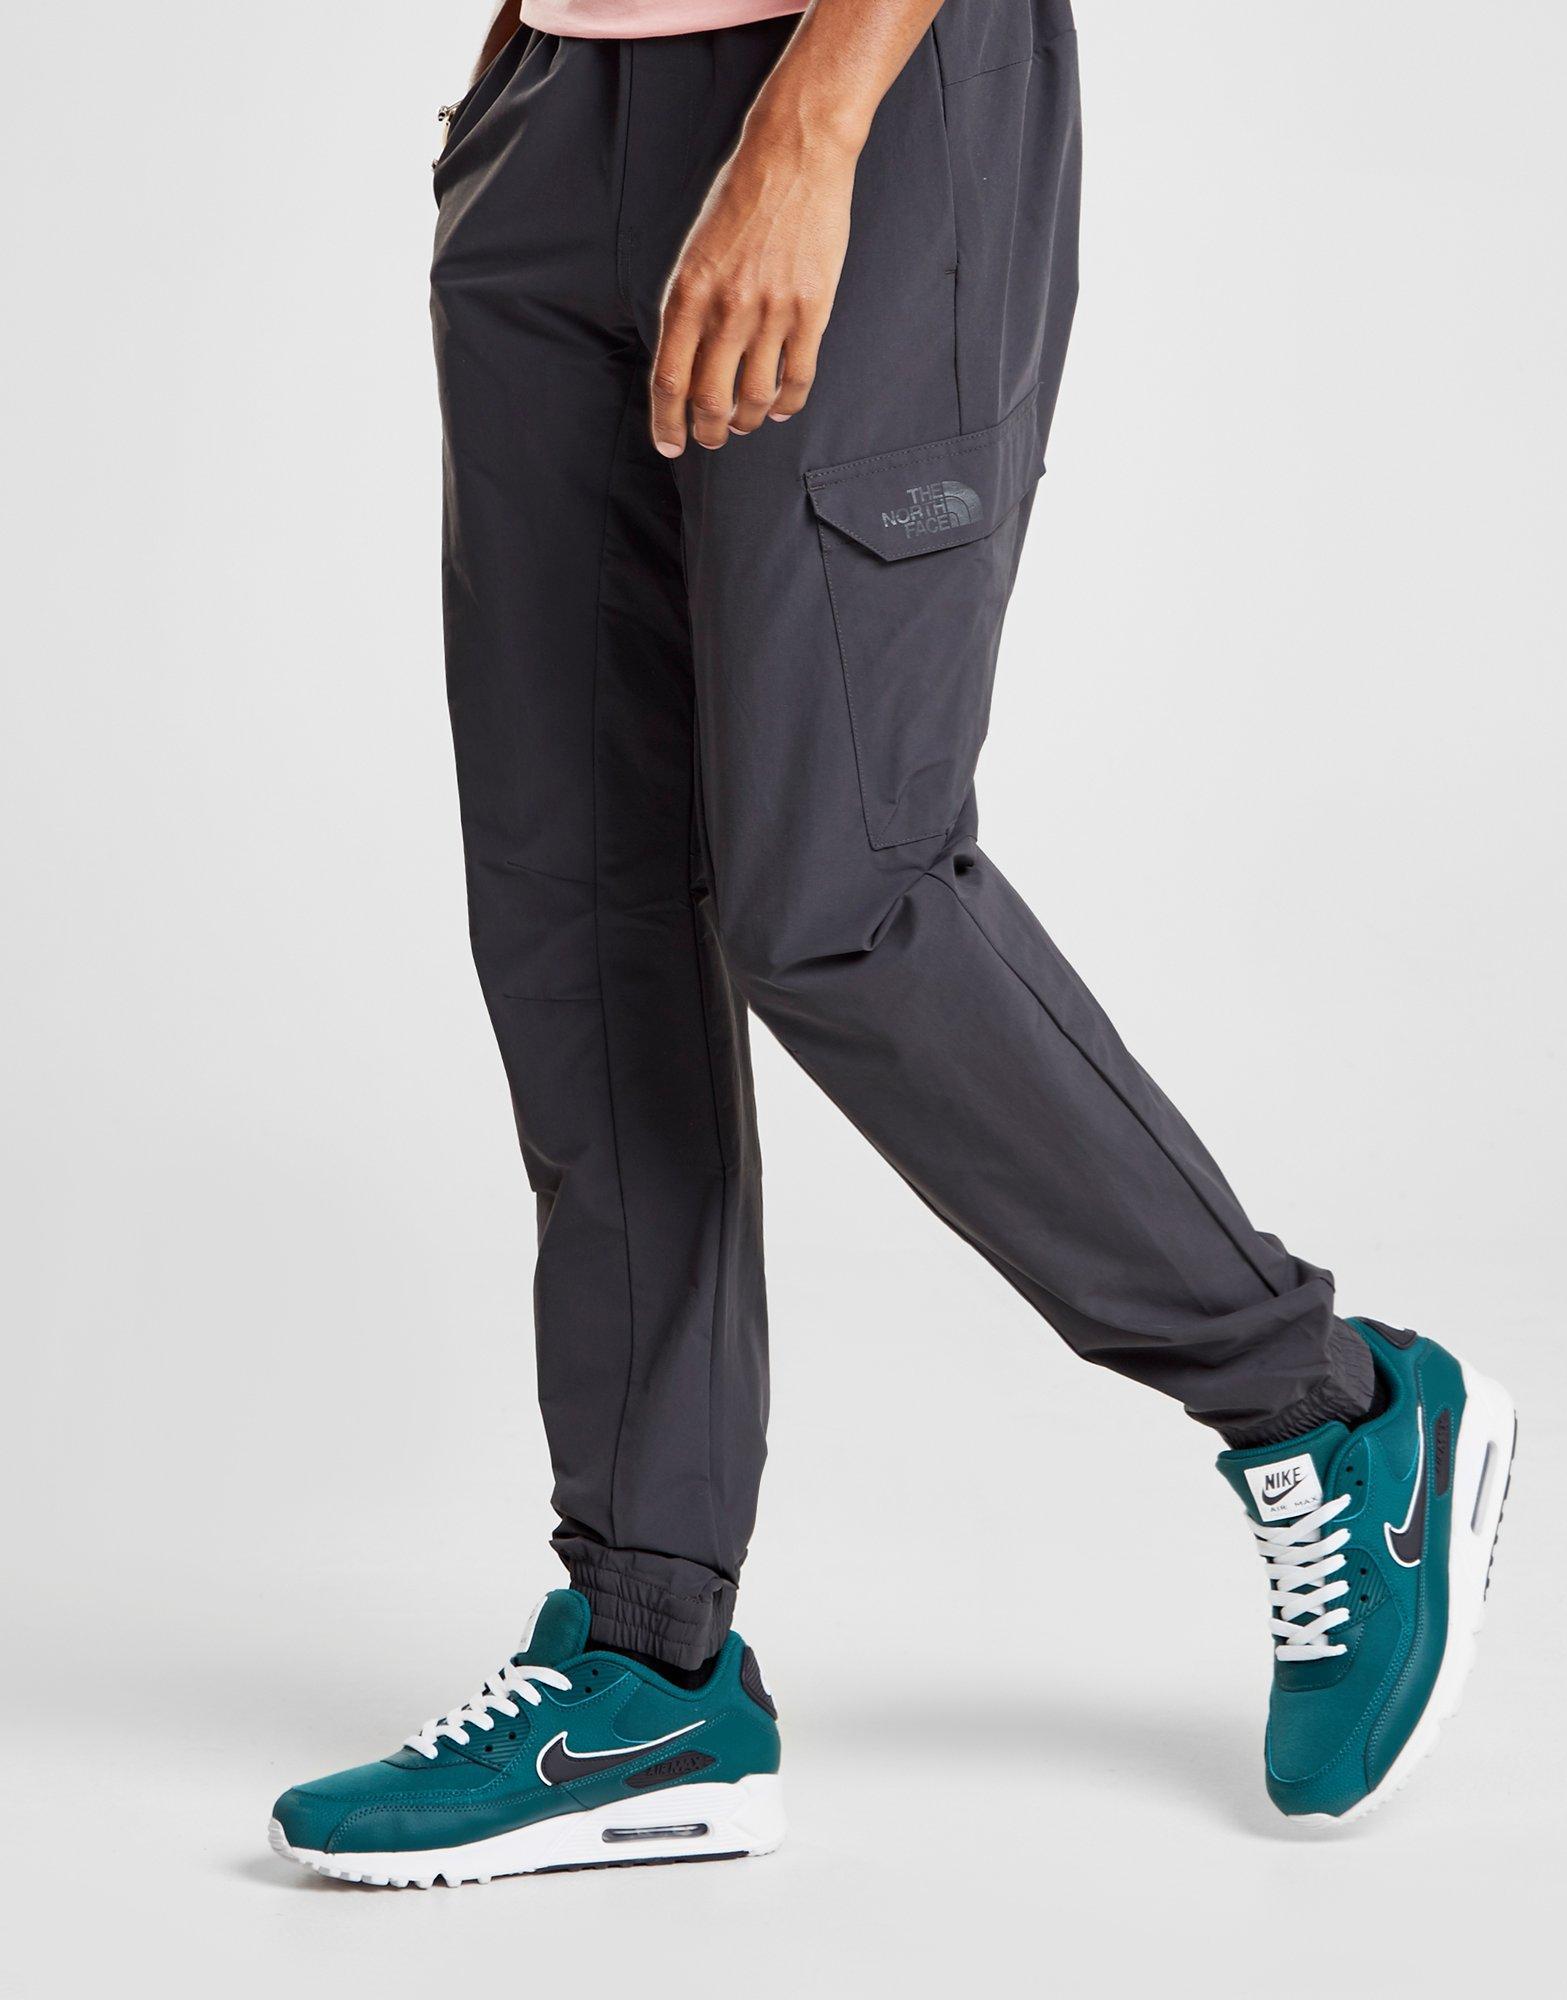 The North Face Ventacious Cargo Pants in Dark Grey (Gray) for Men - Lyst